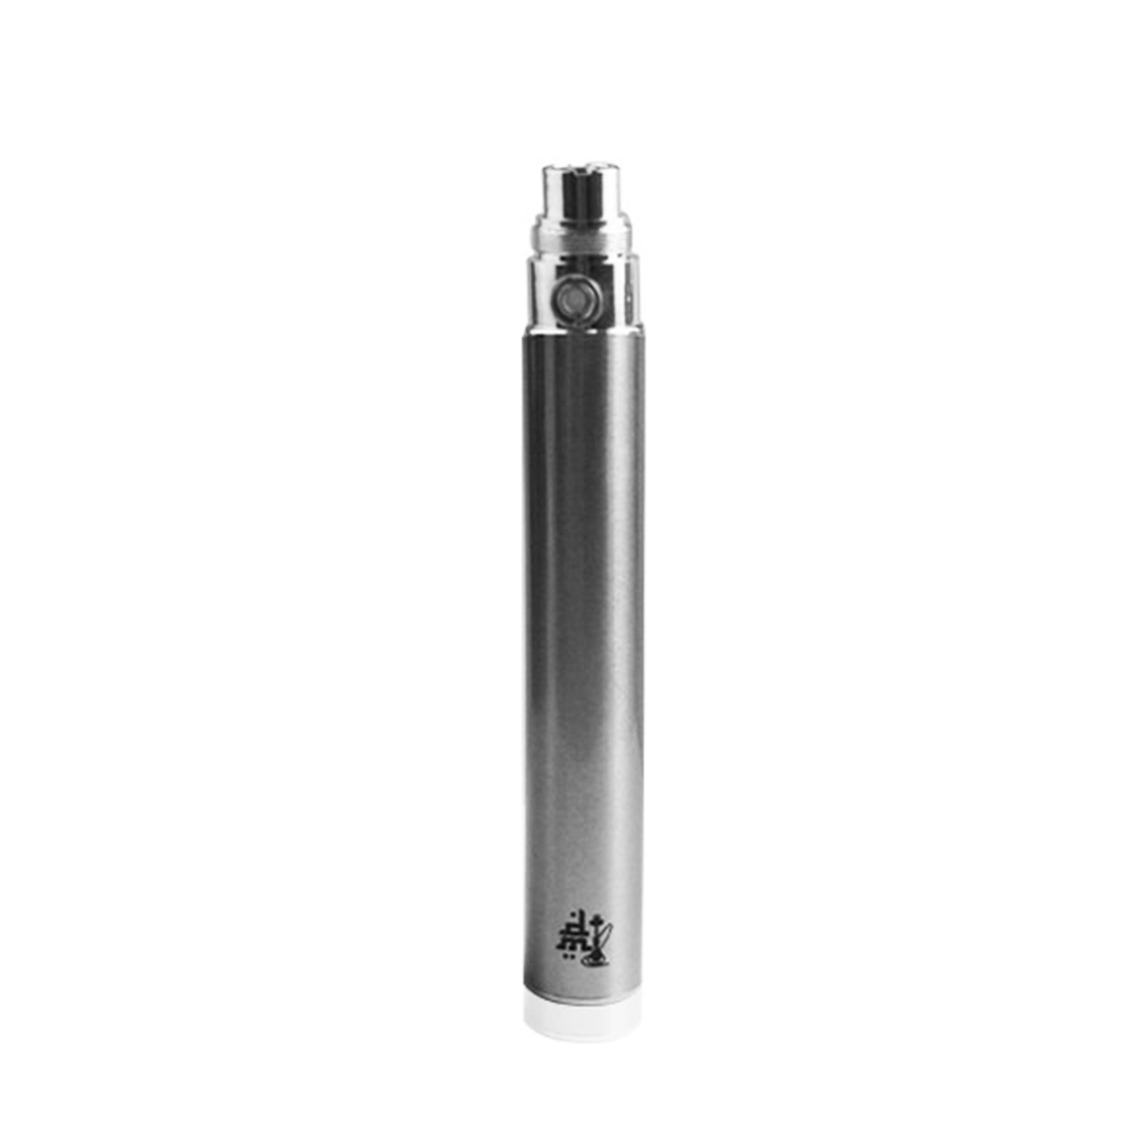 Diamond Mist EGO High Capacity Battery 1100mAh Spare or Replacement Vape Battery - Silver